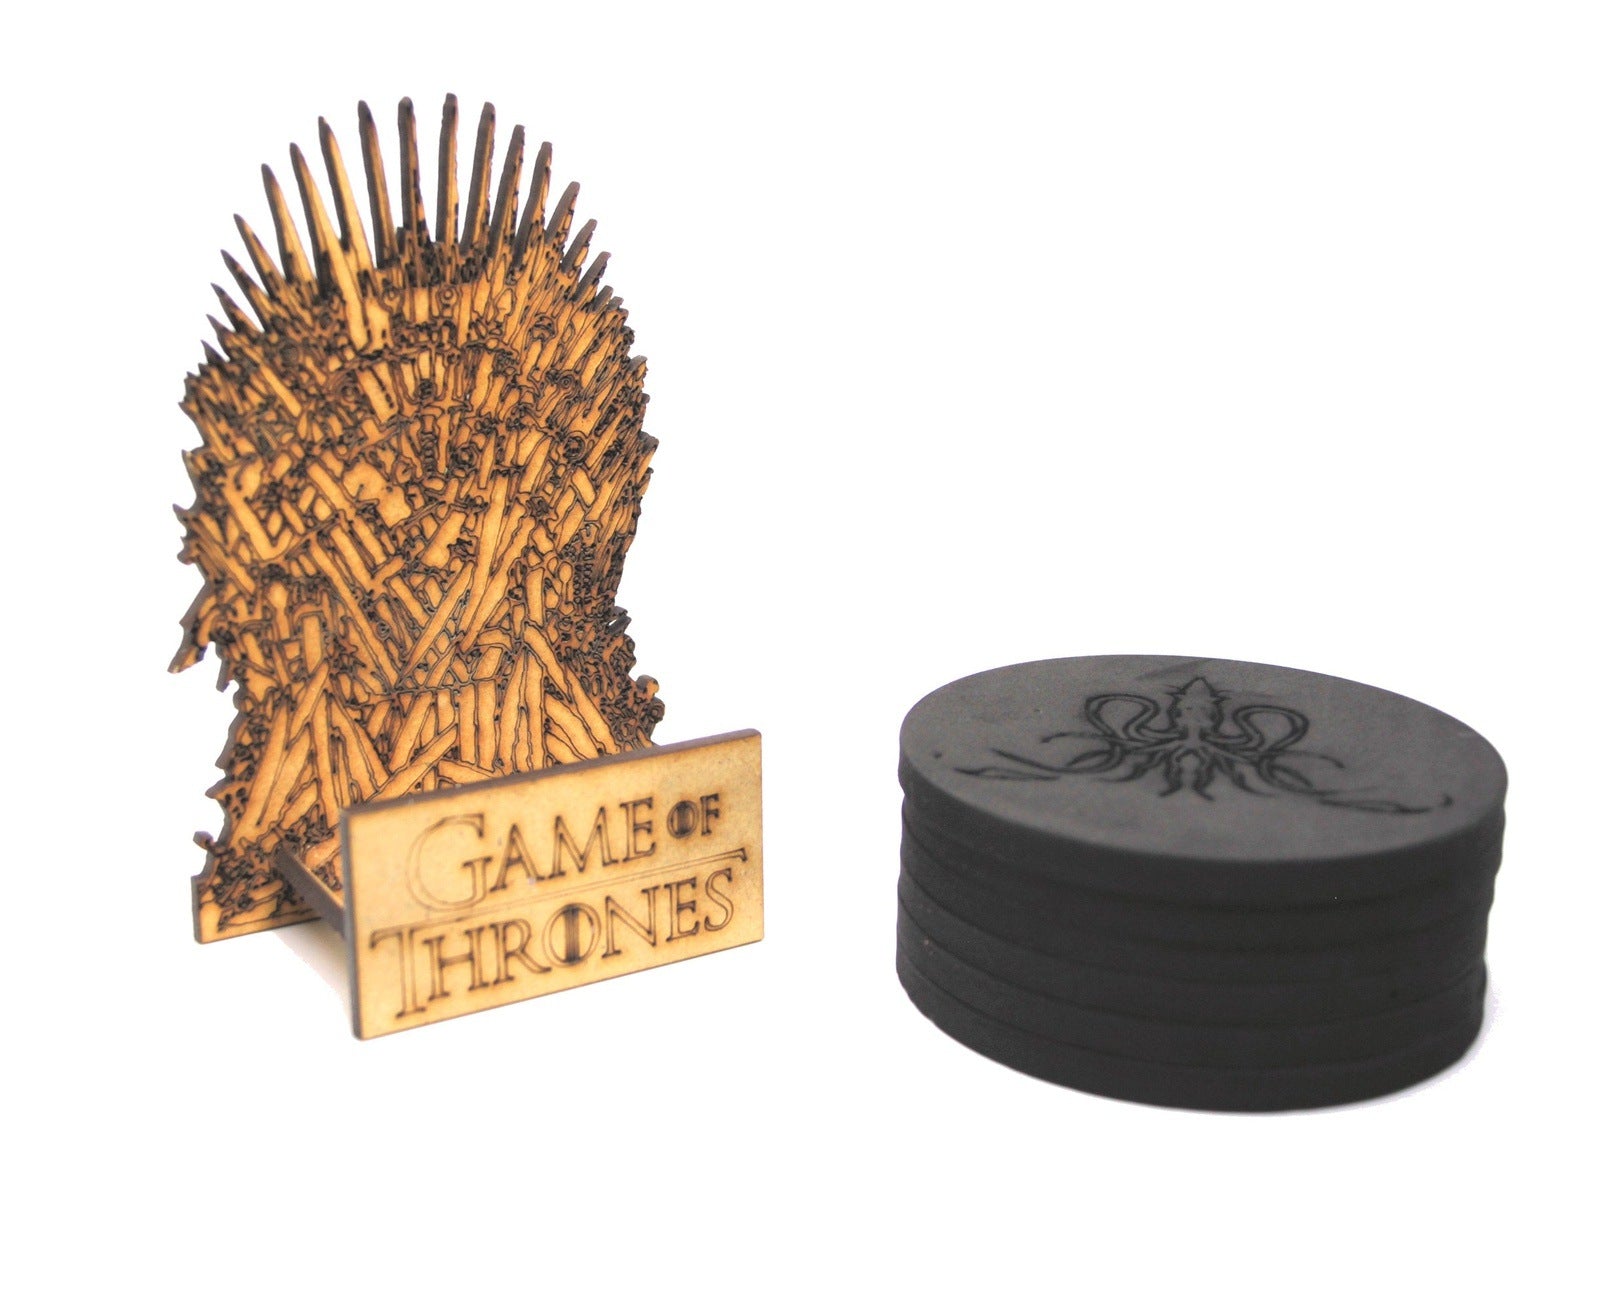 GOT Game of Thrones Coasters 6 Pack with Iron Throne